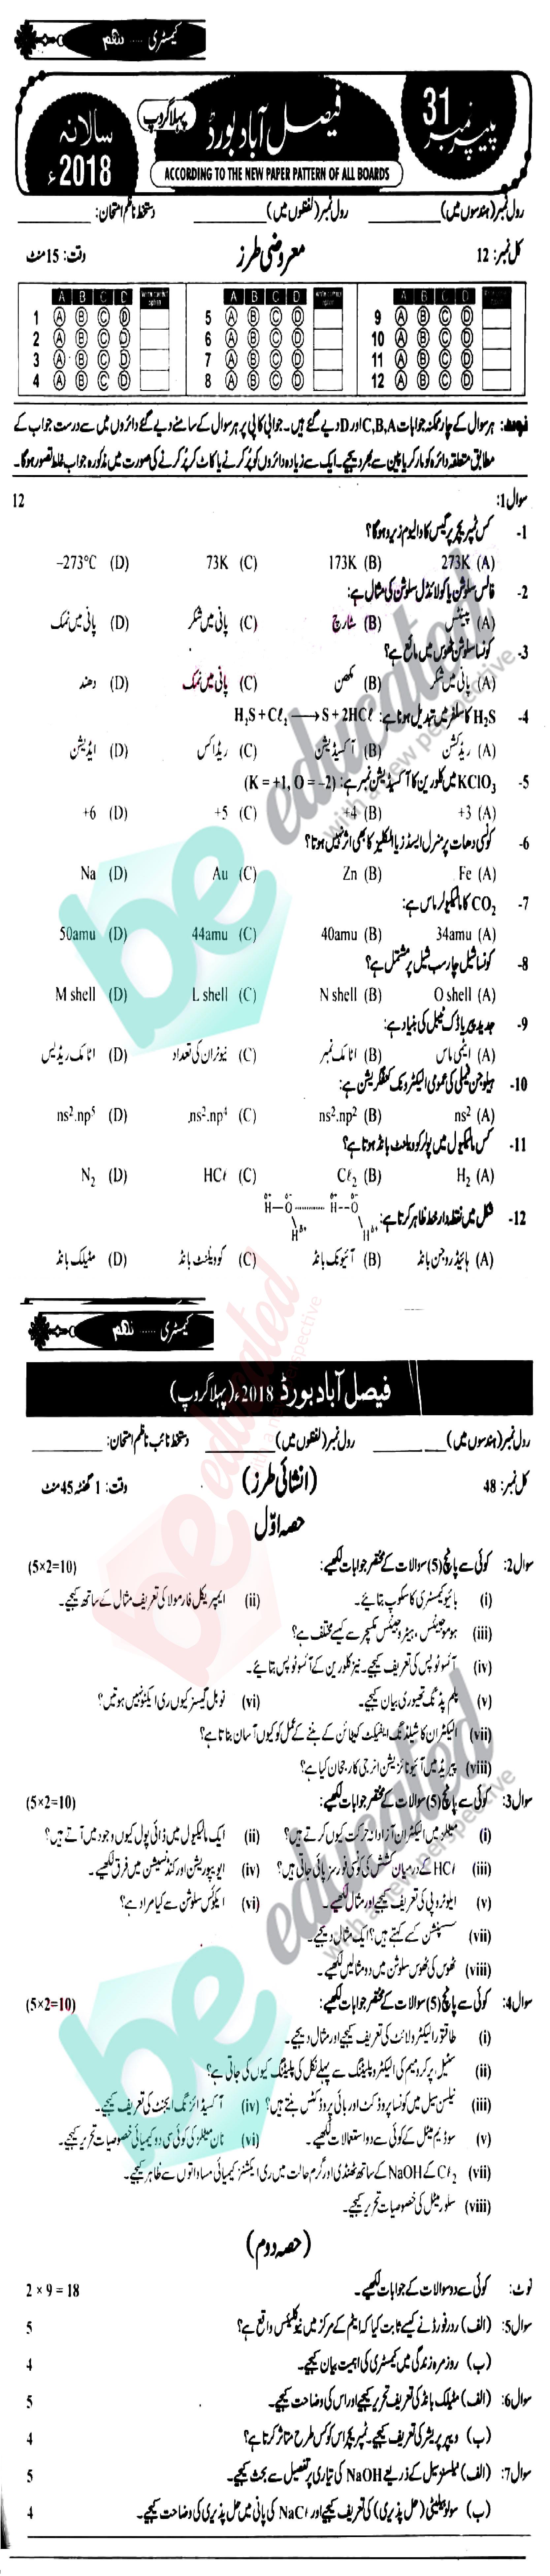 Chemistry 9th class Past Paper Group 1 BISE Faisalabad 2018